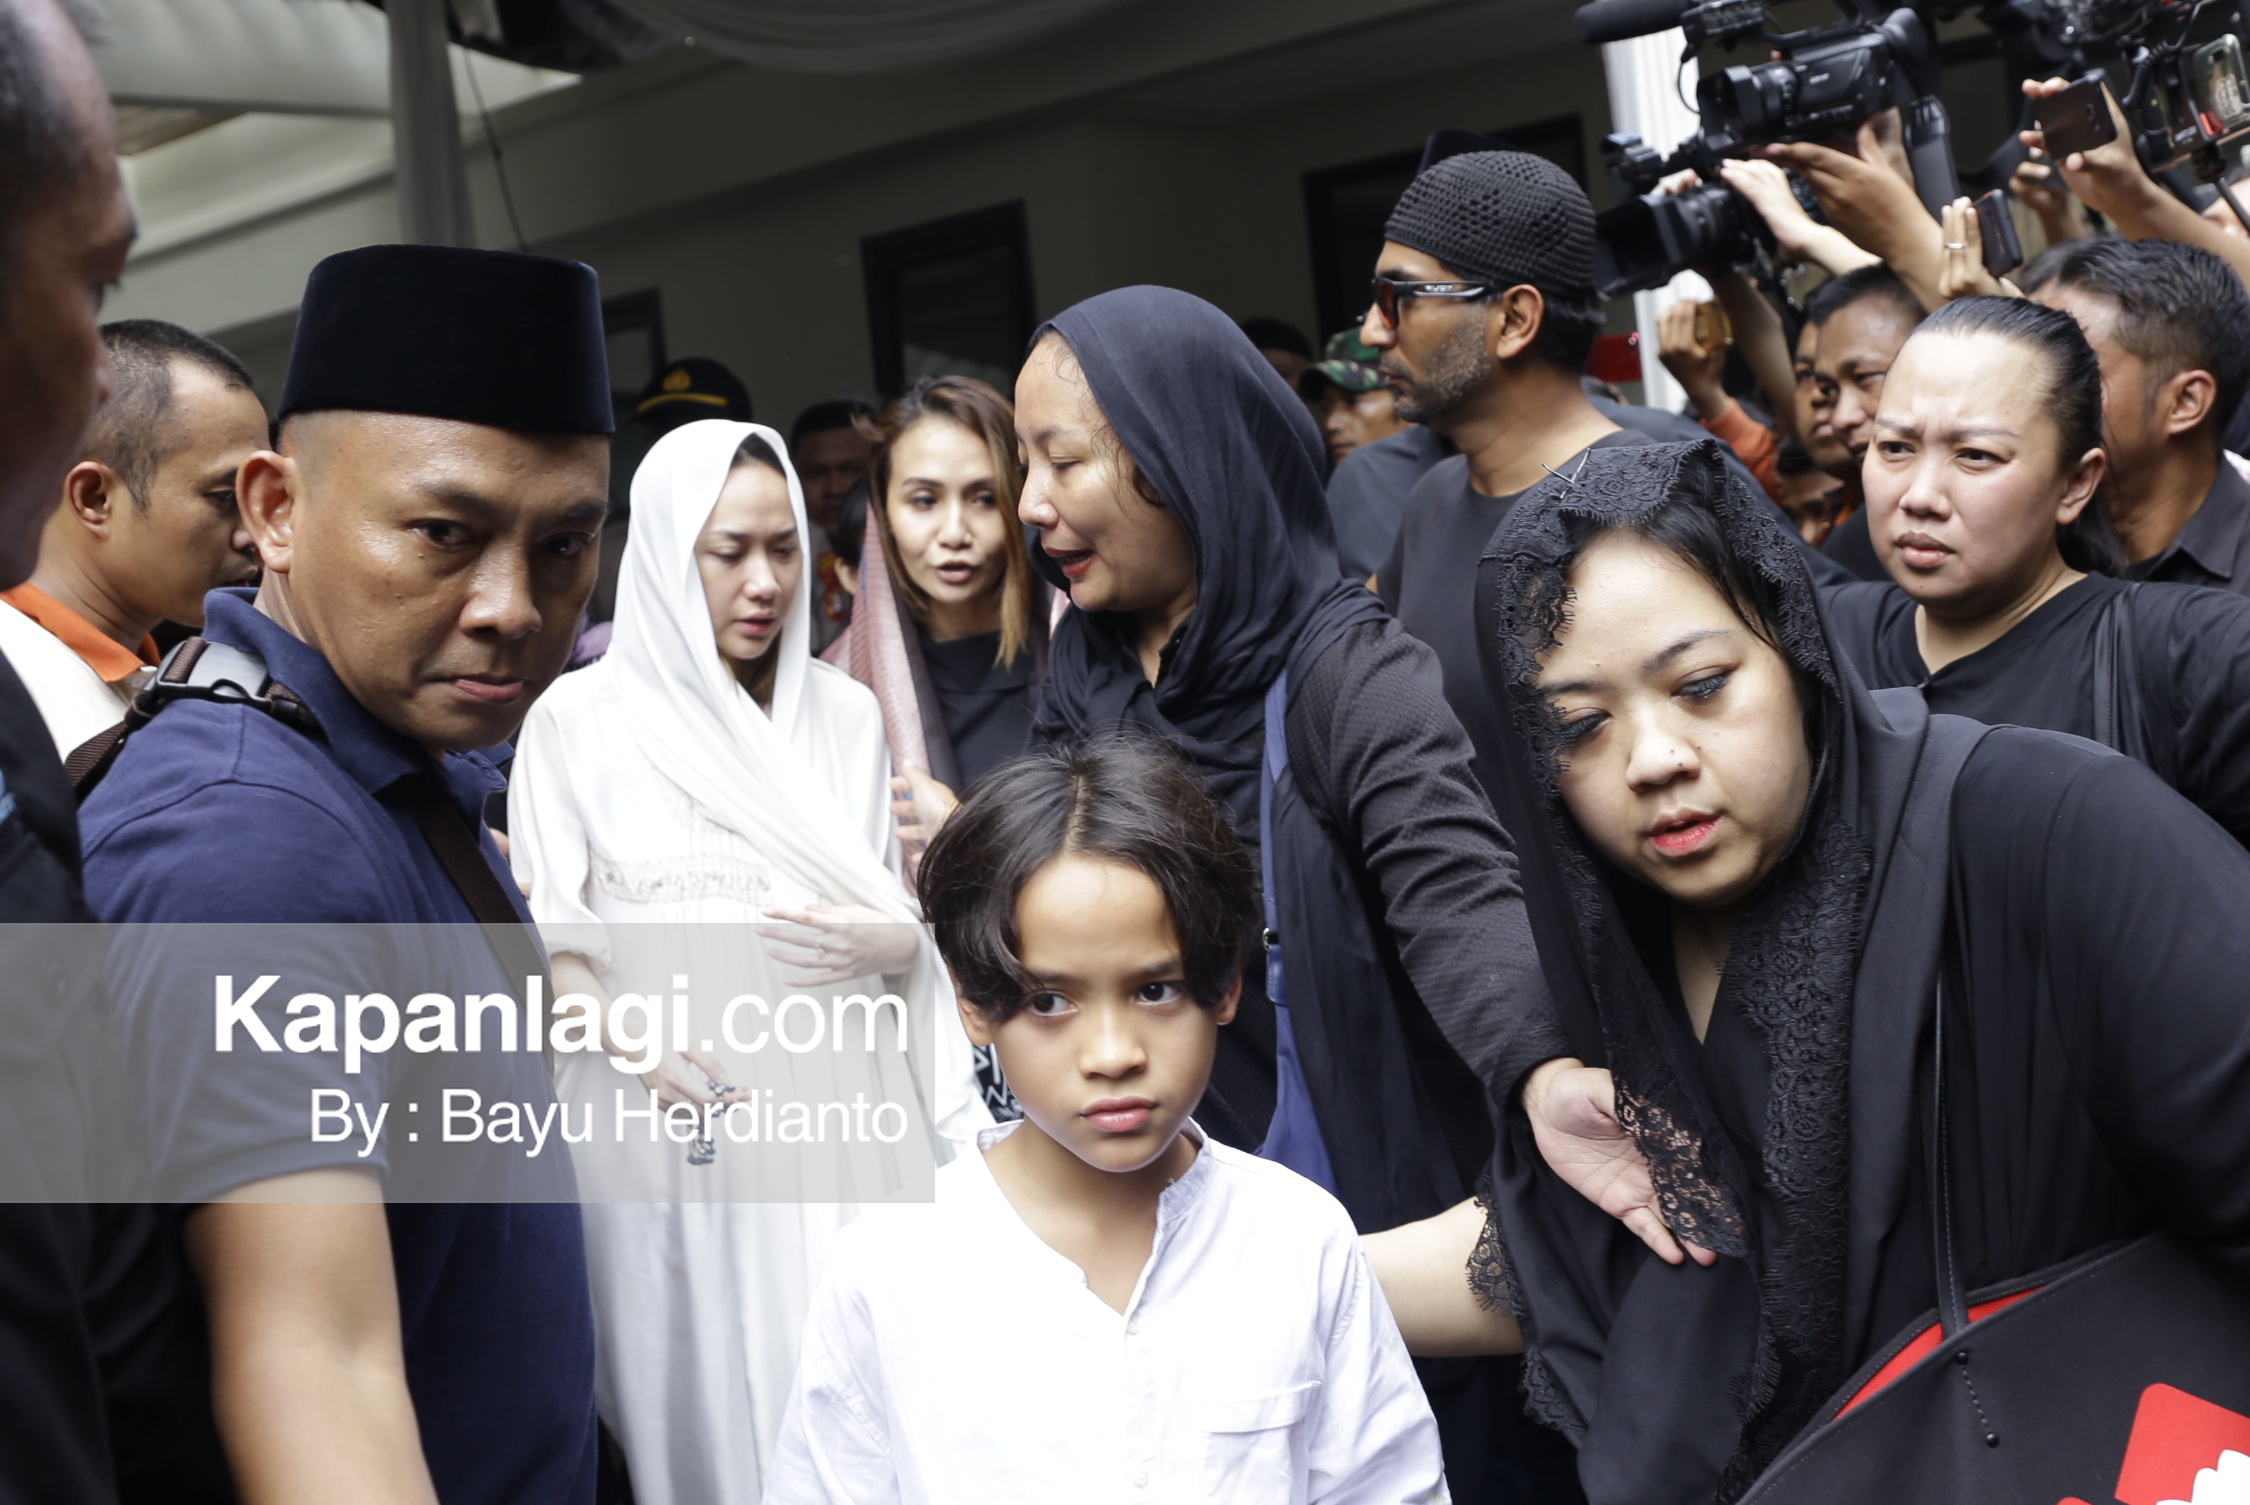 Unge, as she is called, leaving the funeral home to go to the burial site. (Photo: Bayu Herdianto)